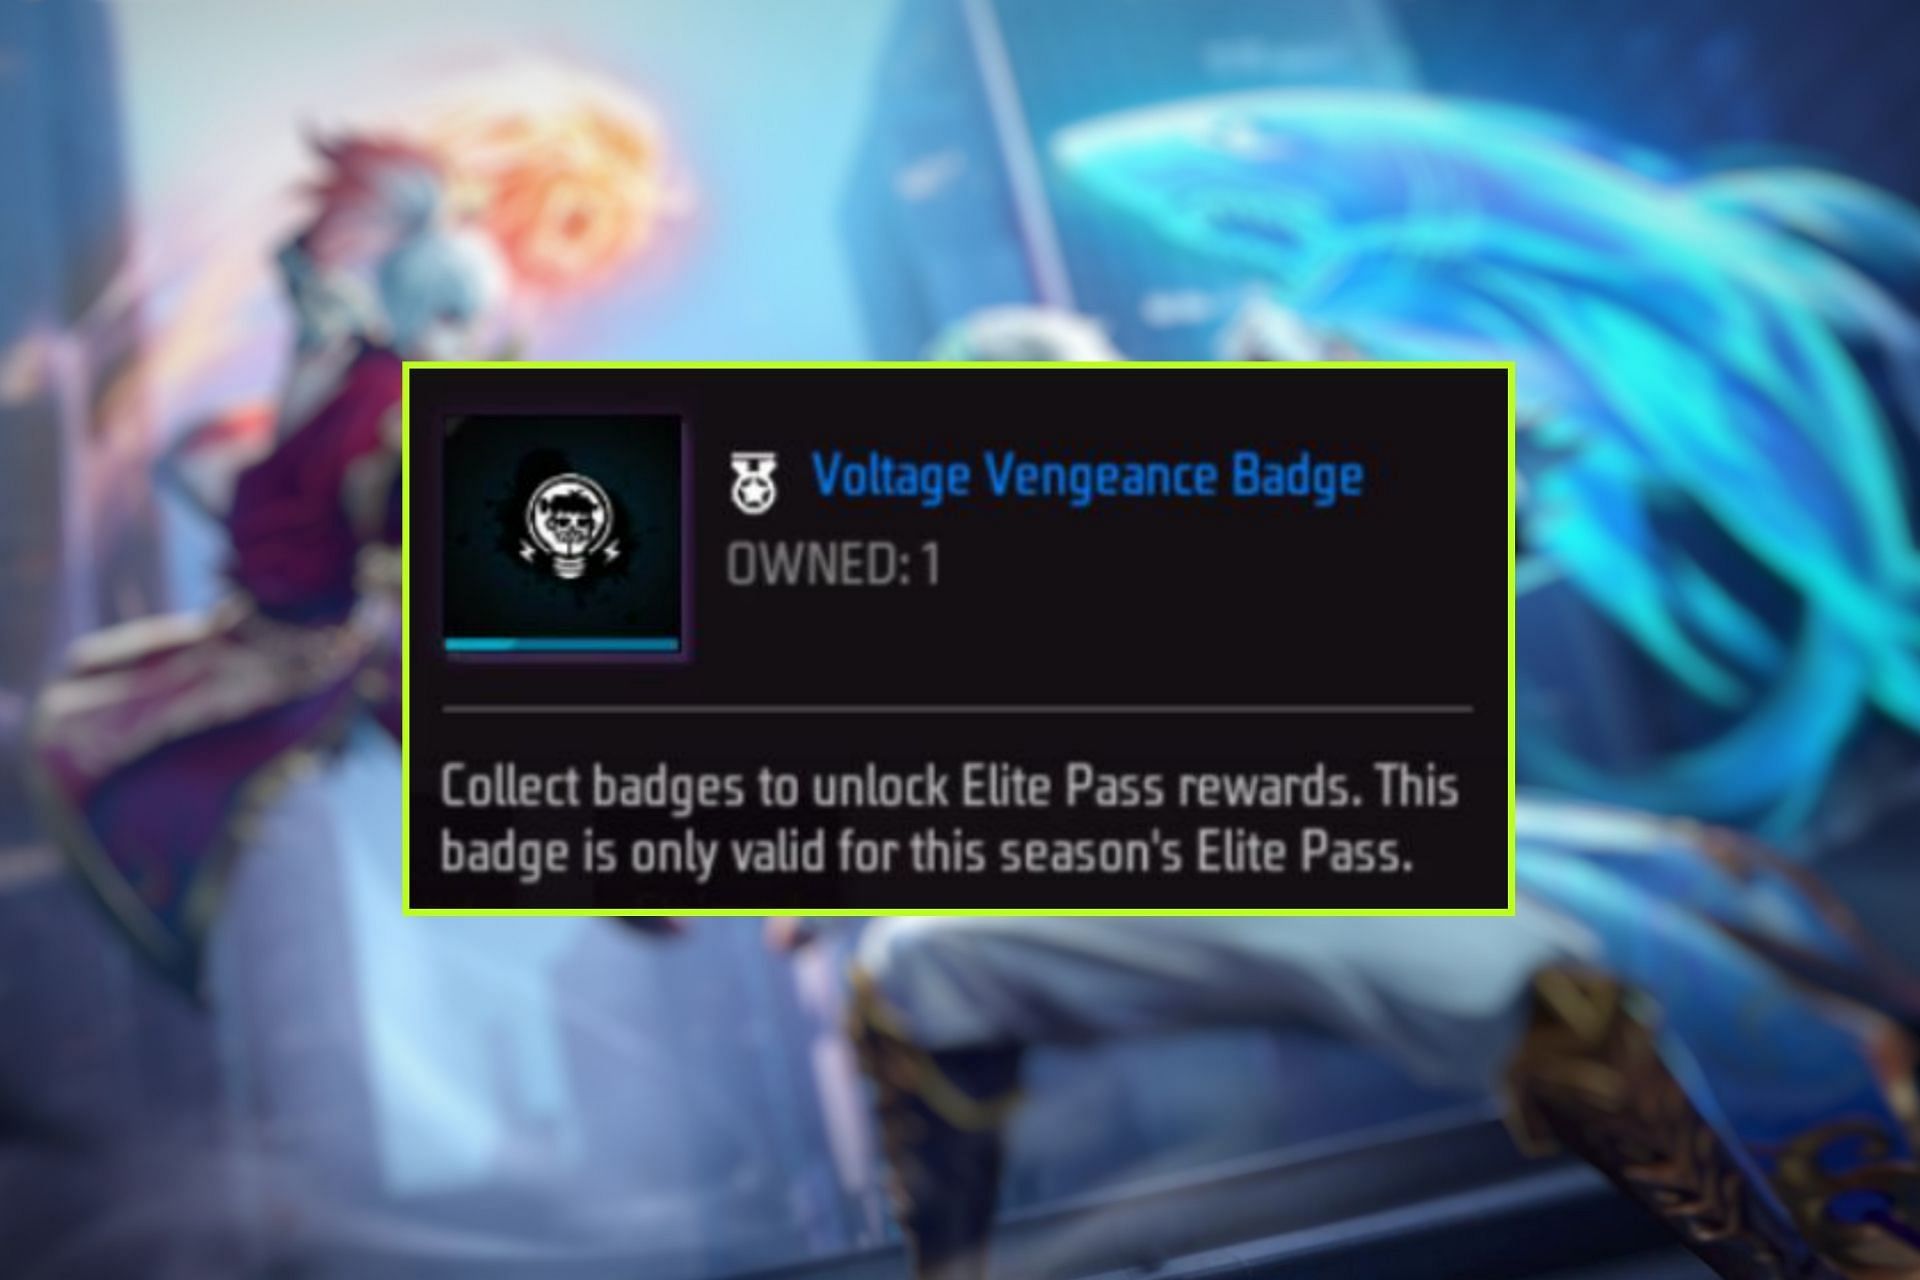 free-fire-max-elite-pass-badge-top-up-get-free-voltage-vengeance-badges